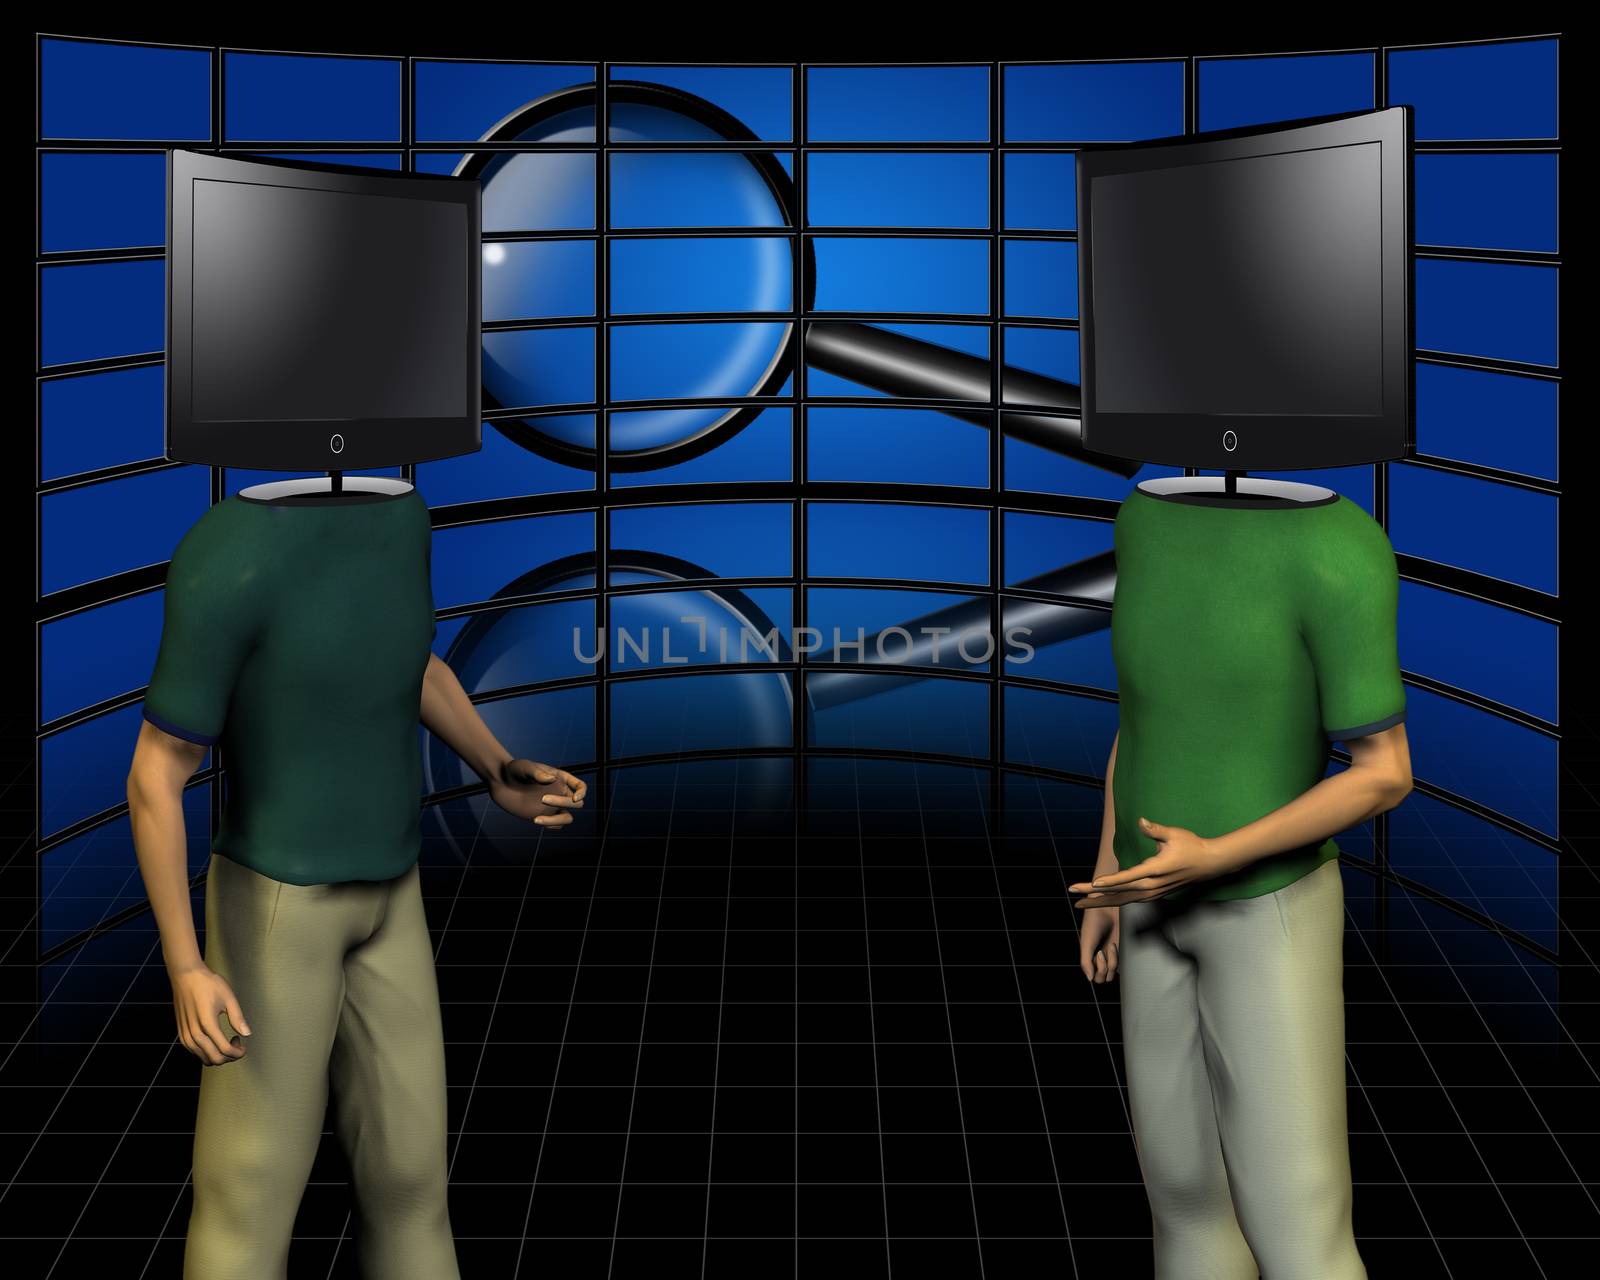 Surrealism. Two men with TV screens instead of head makes a dispute. Wall of screens and magnifier on a background.